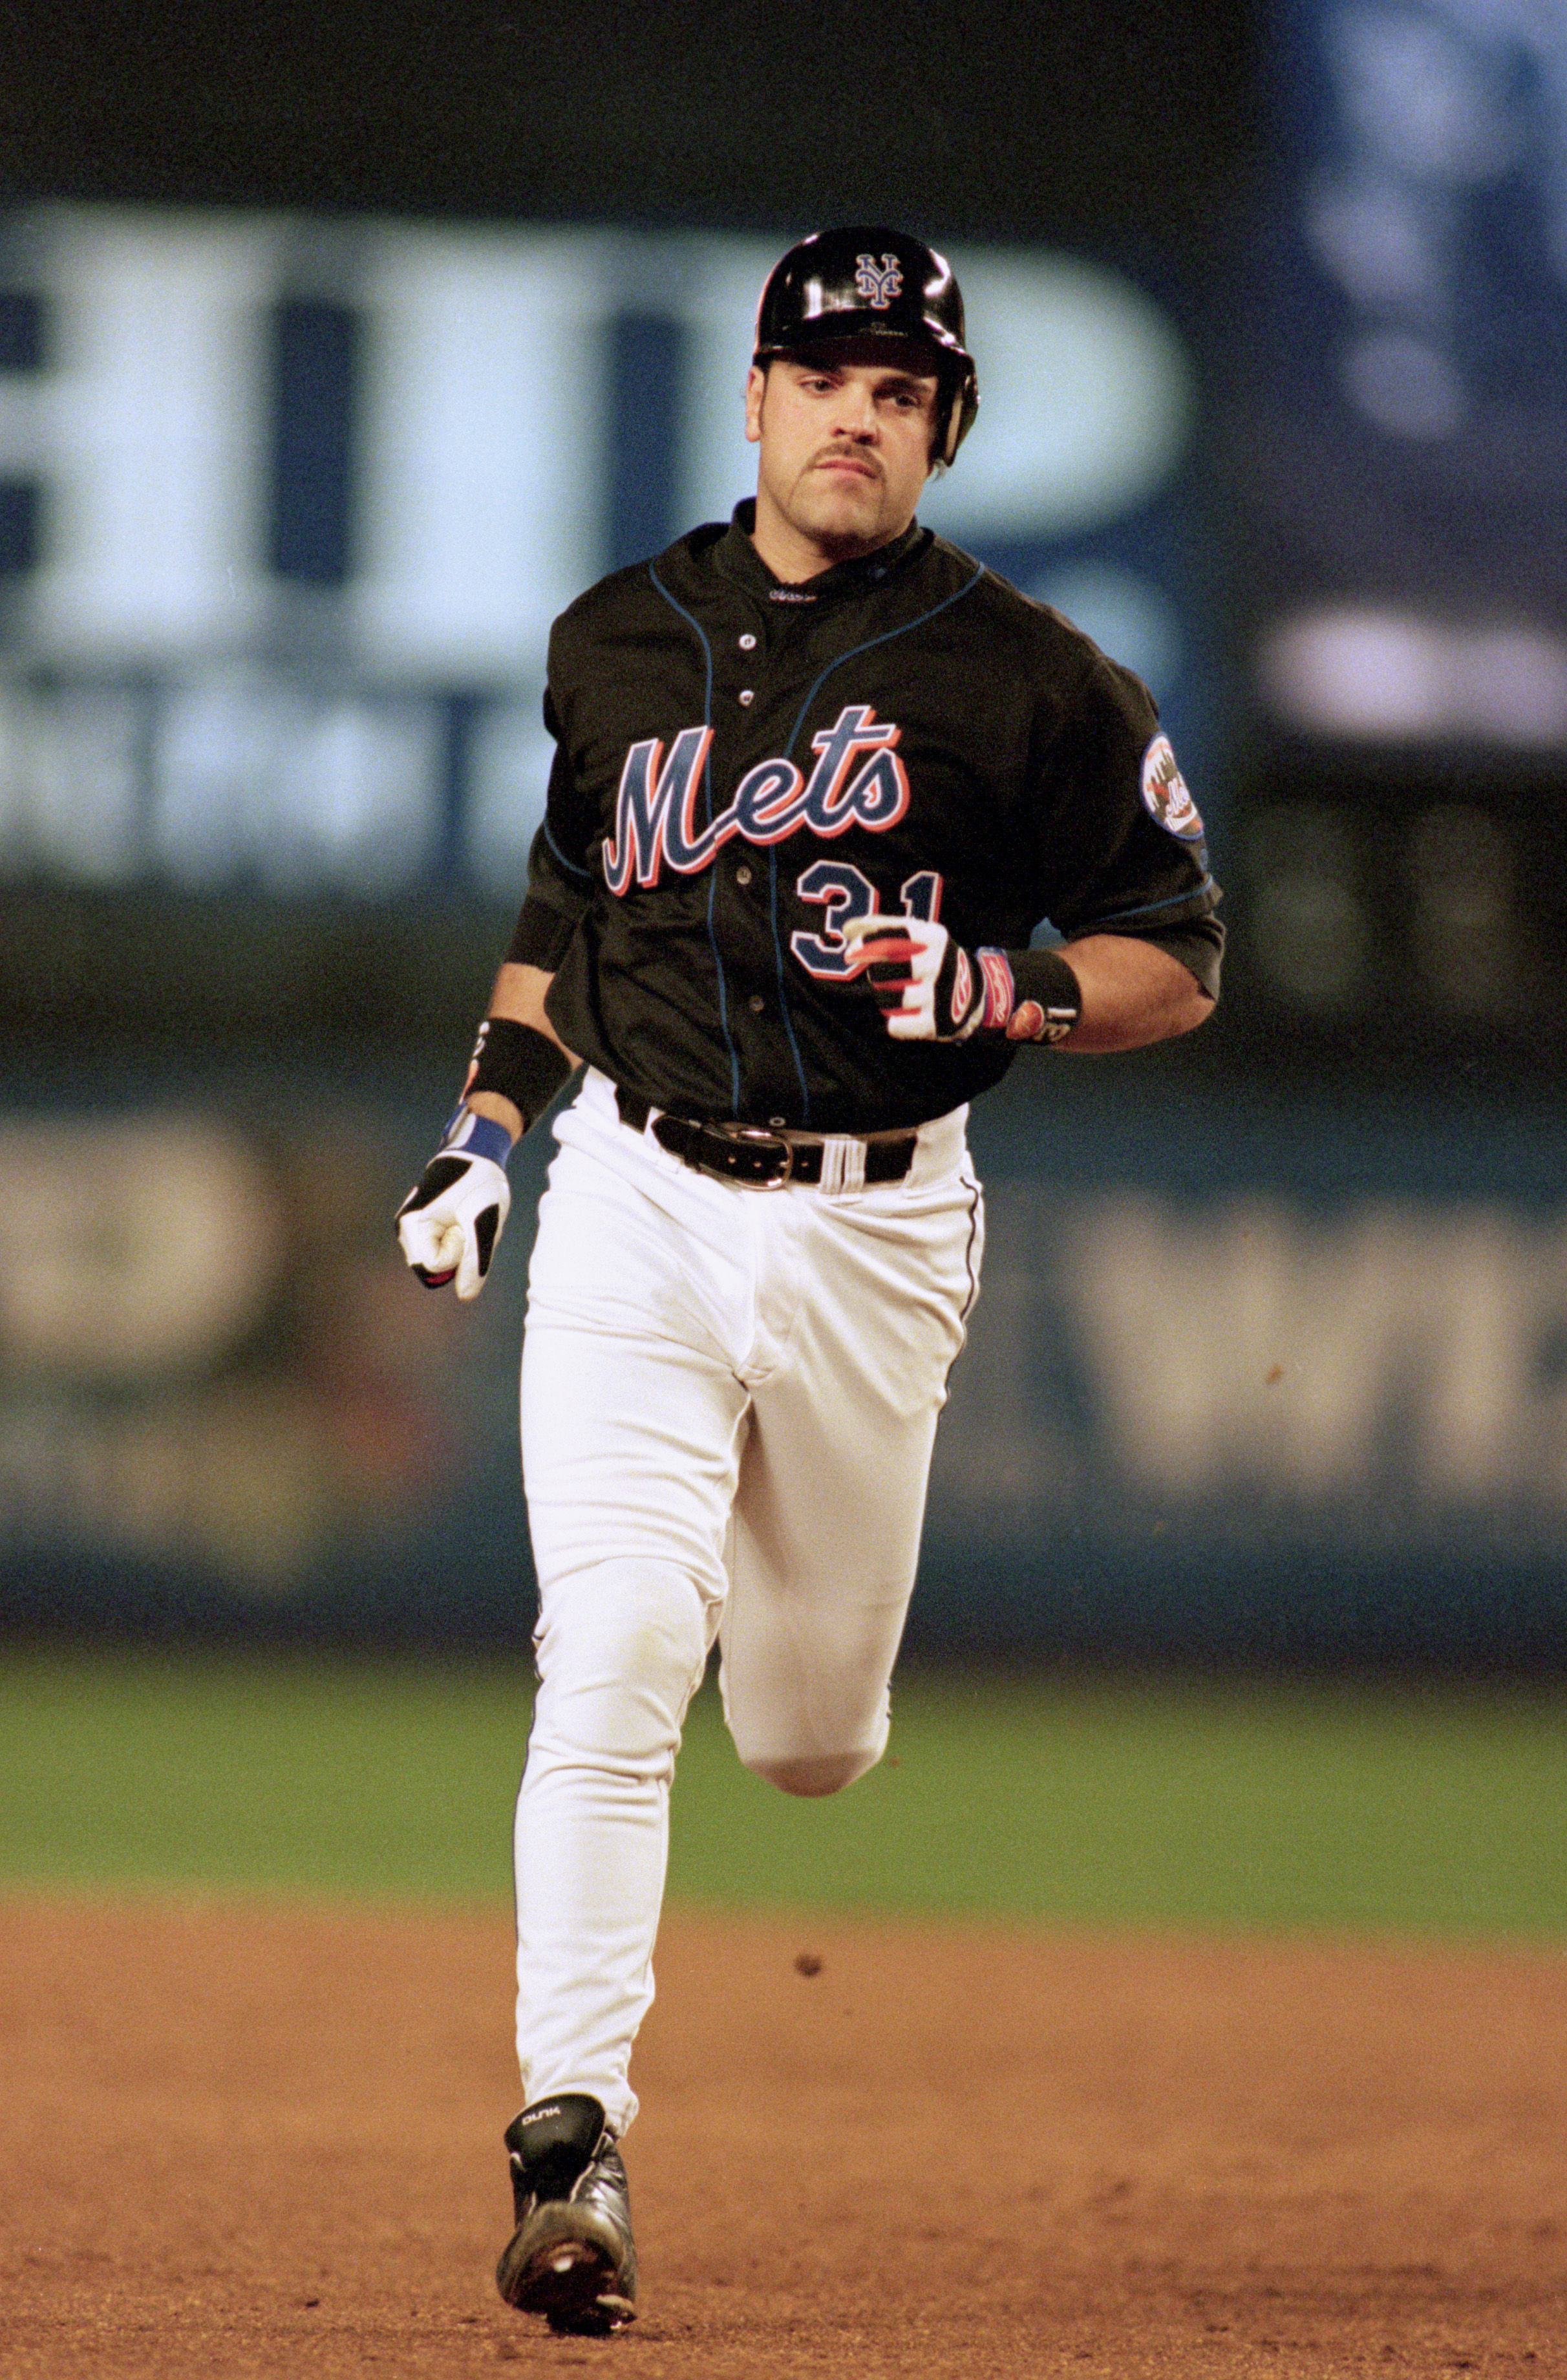 FLUSHING, NY - OCTOBER 25:  Mike Piazza #31 of the New York Mets runs the baseline against the New York Yankees during game 4 of the World Series at Shea Stadium on October 25, 2000, in Flushing, New York.  The Mets won 2-0. (Photo by Al Bello/Getty Image